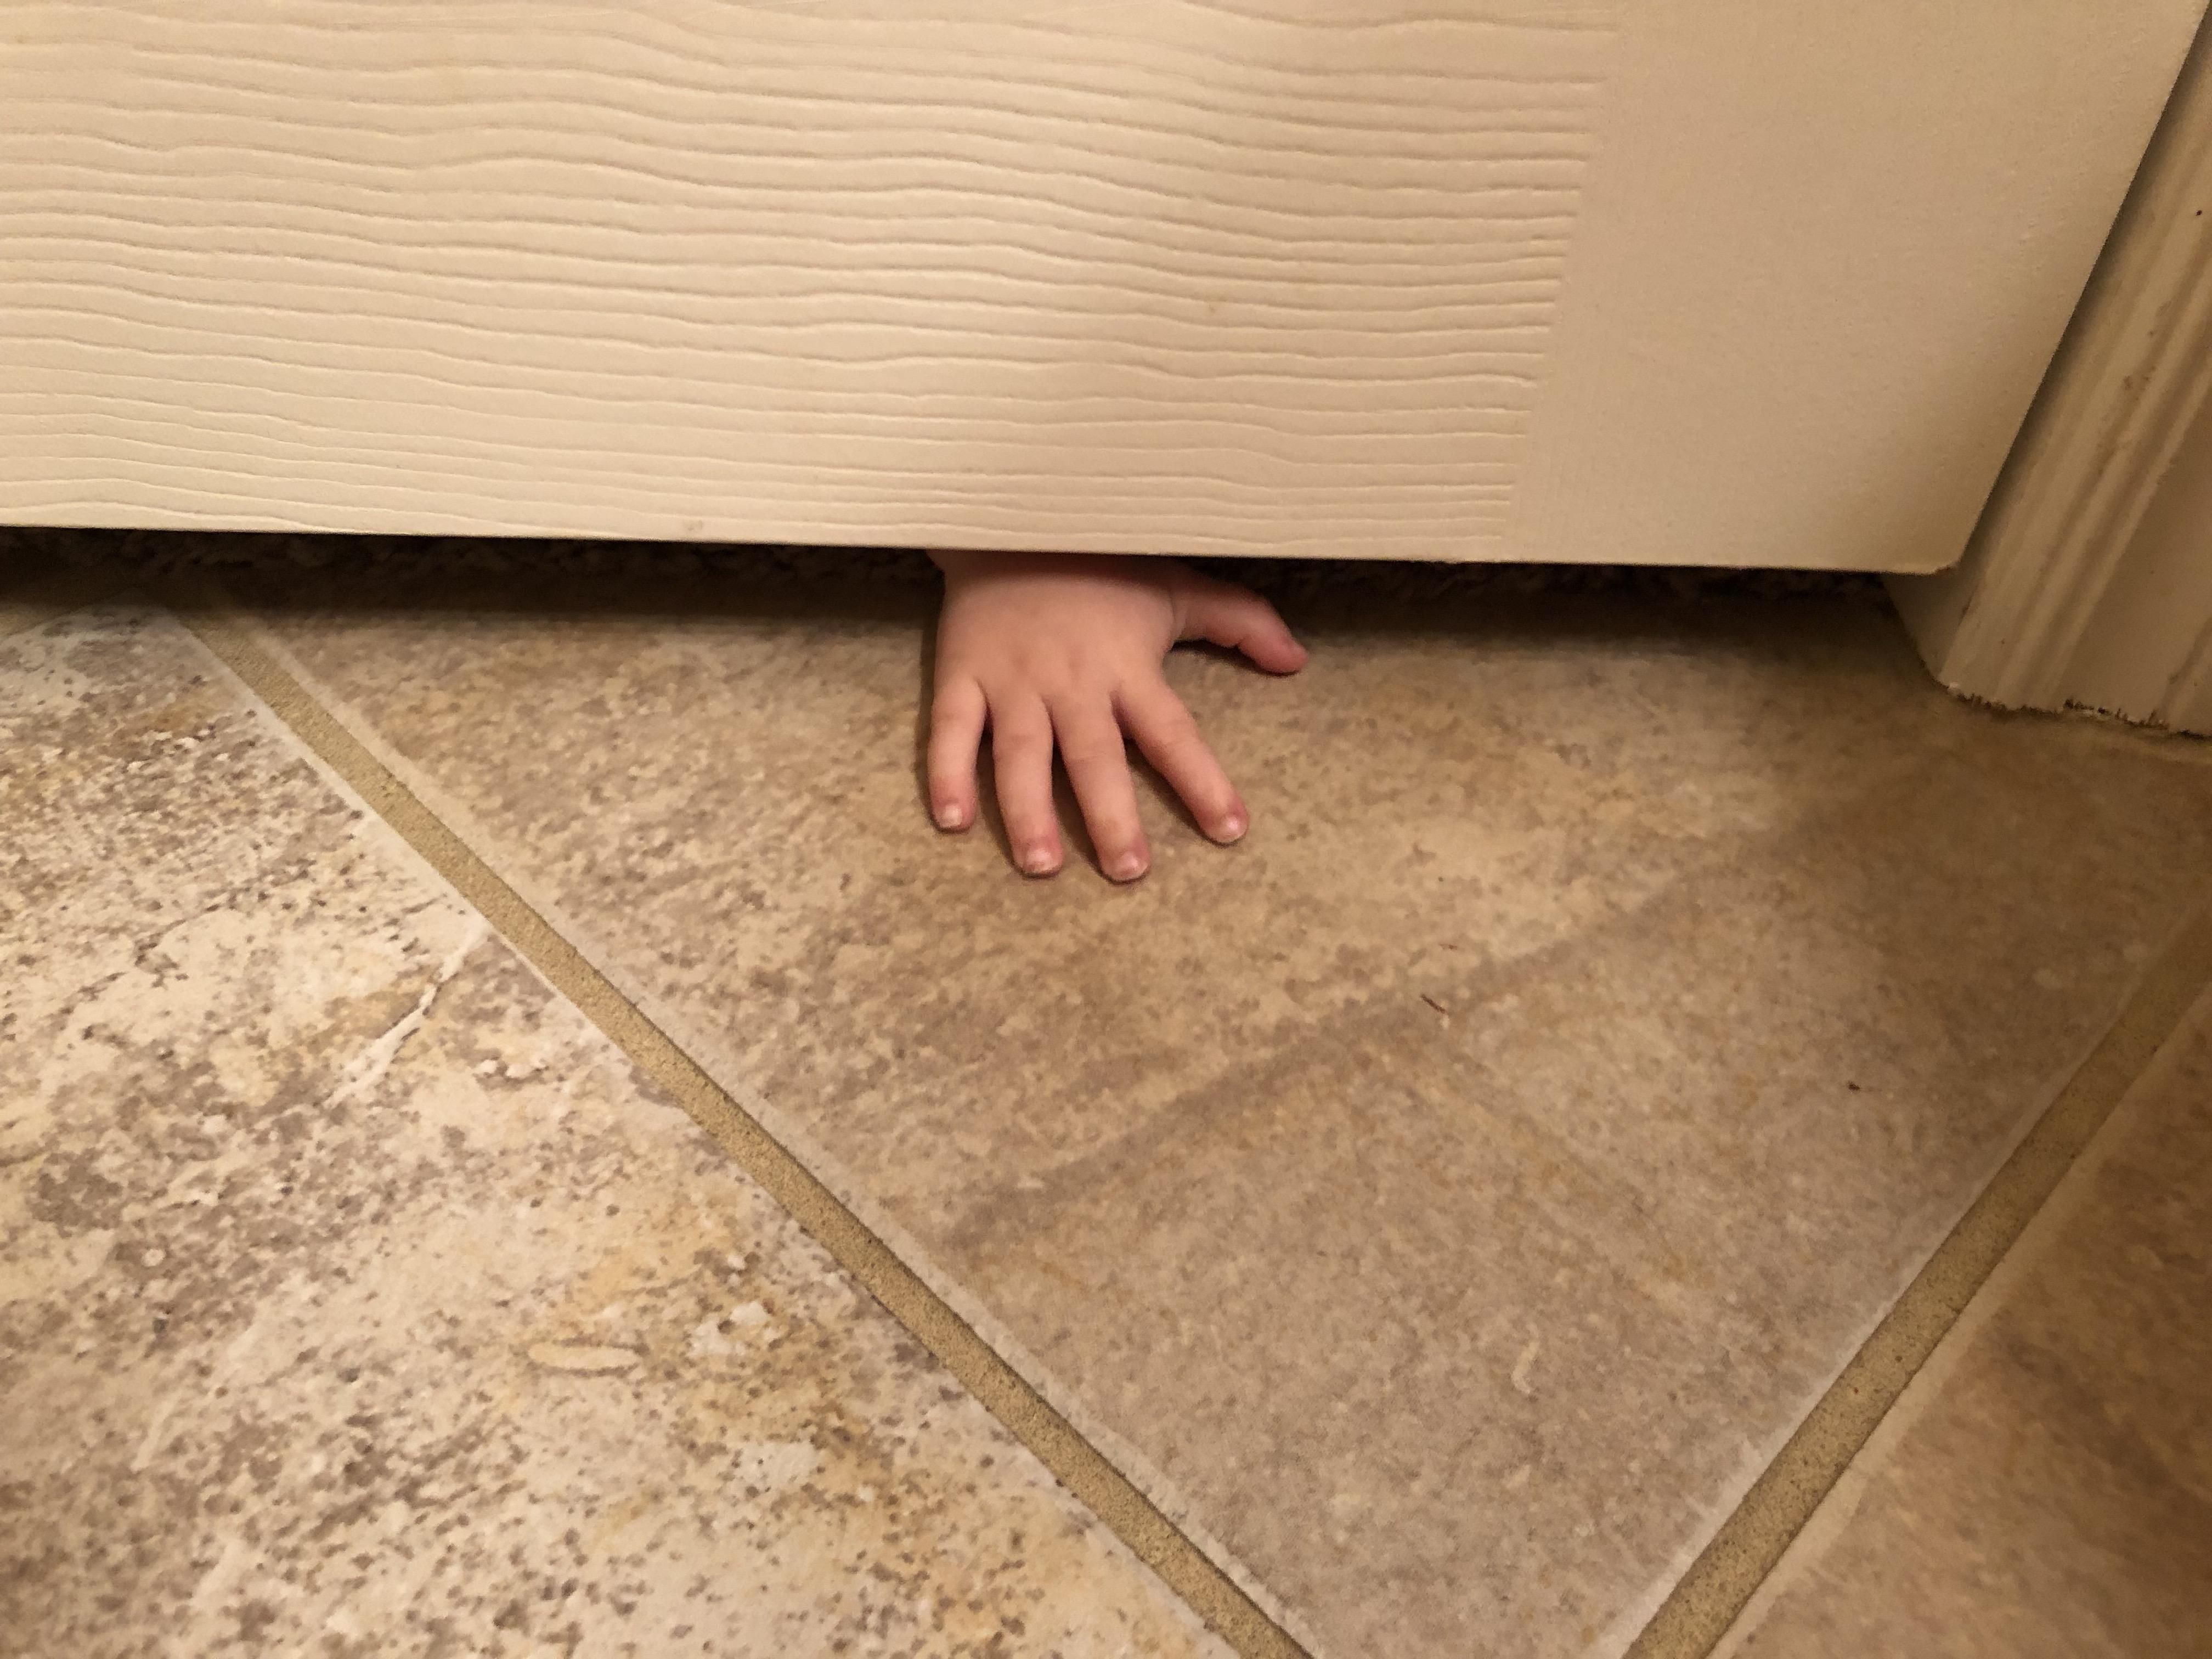 Now I realize why my dad used to hide in the bathroom. You’re never alone.